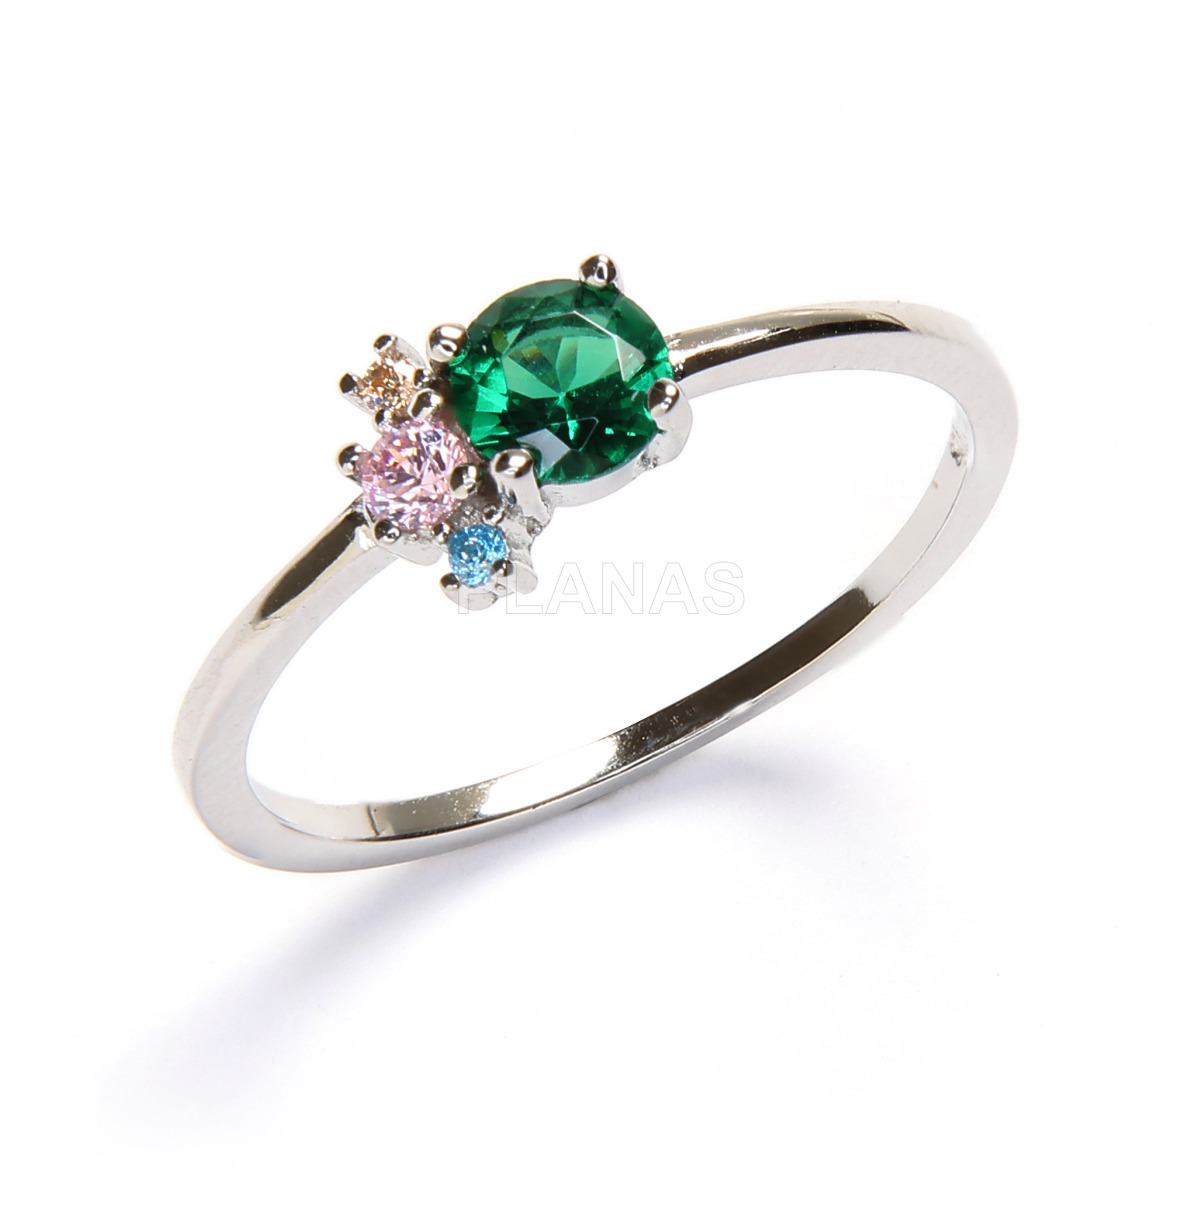 Ring in sterling silver and colored zircons.